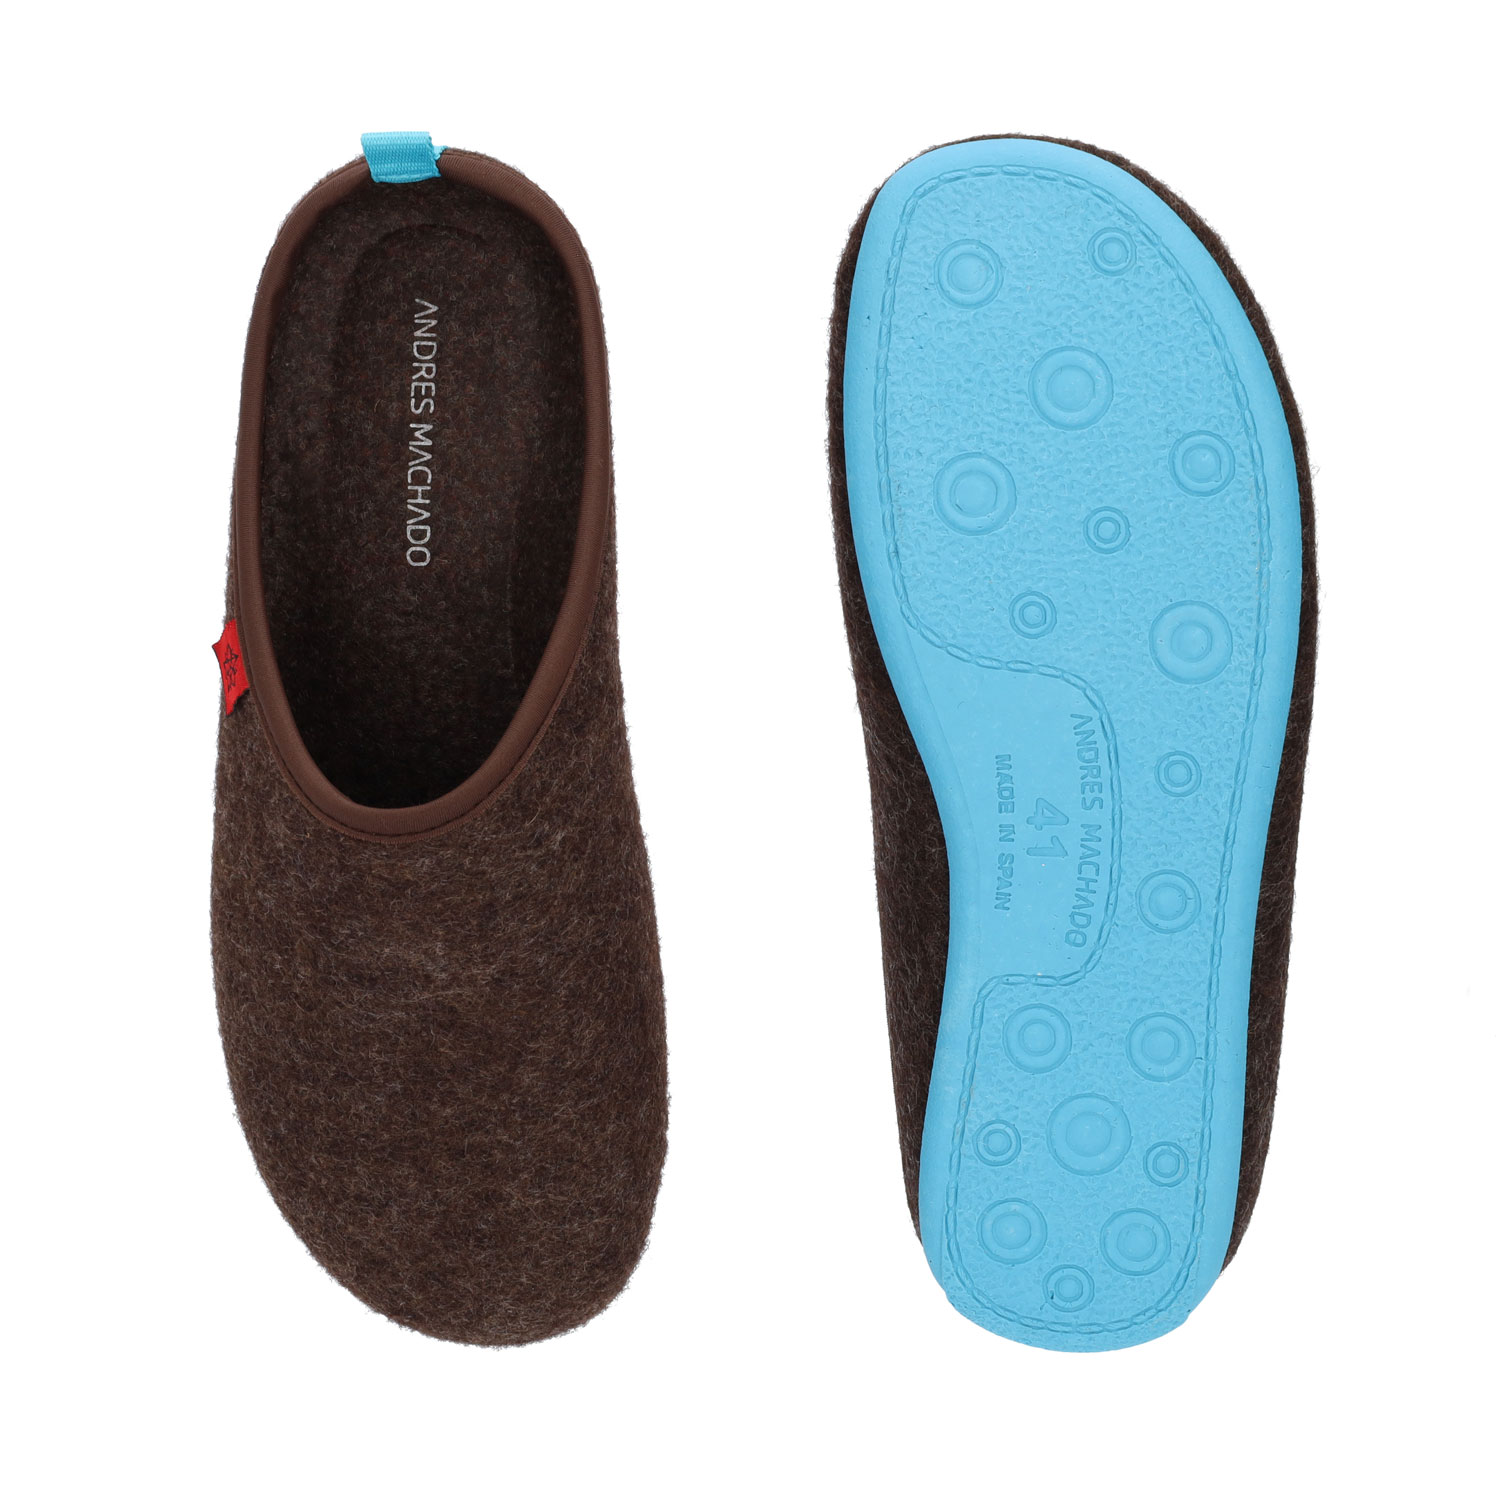 Unisex Brown Felt Slippers with Blue sole 